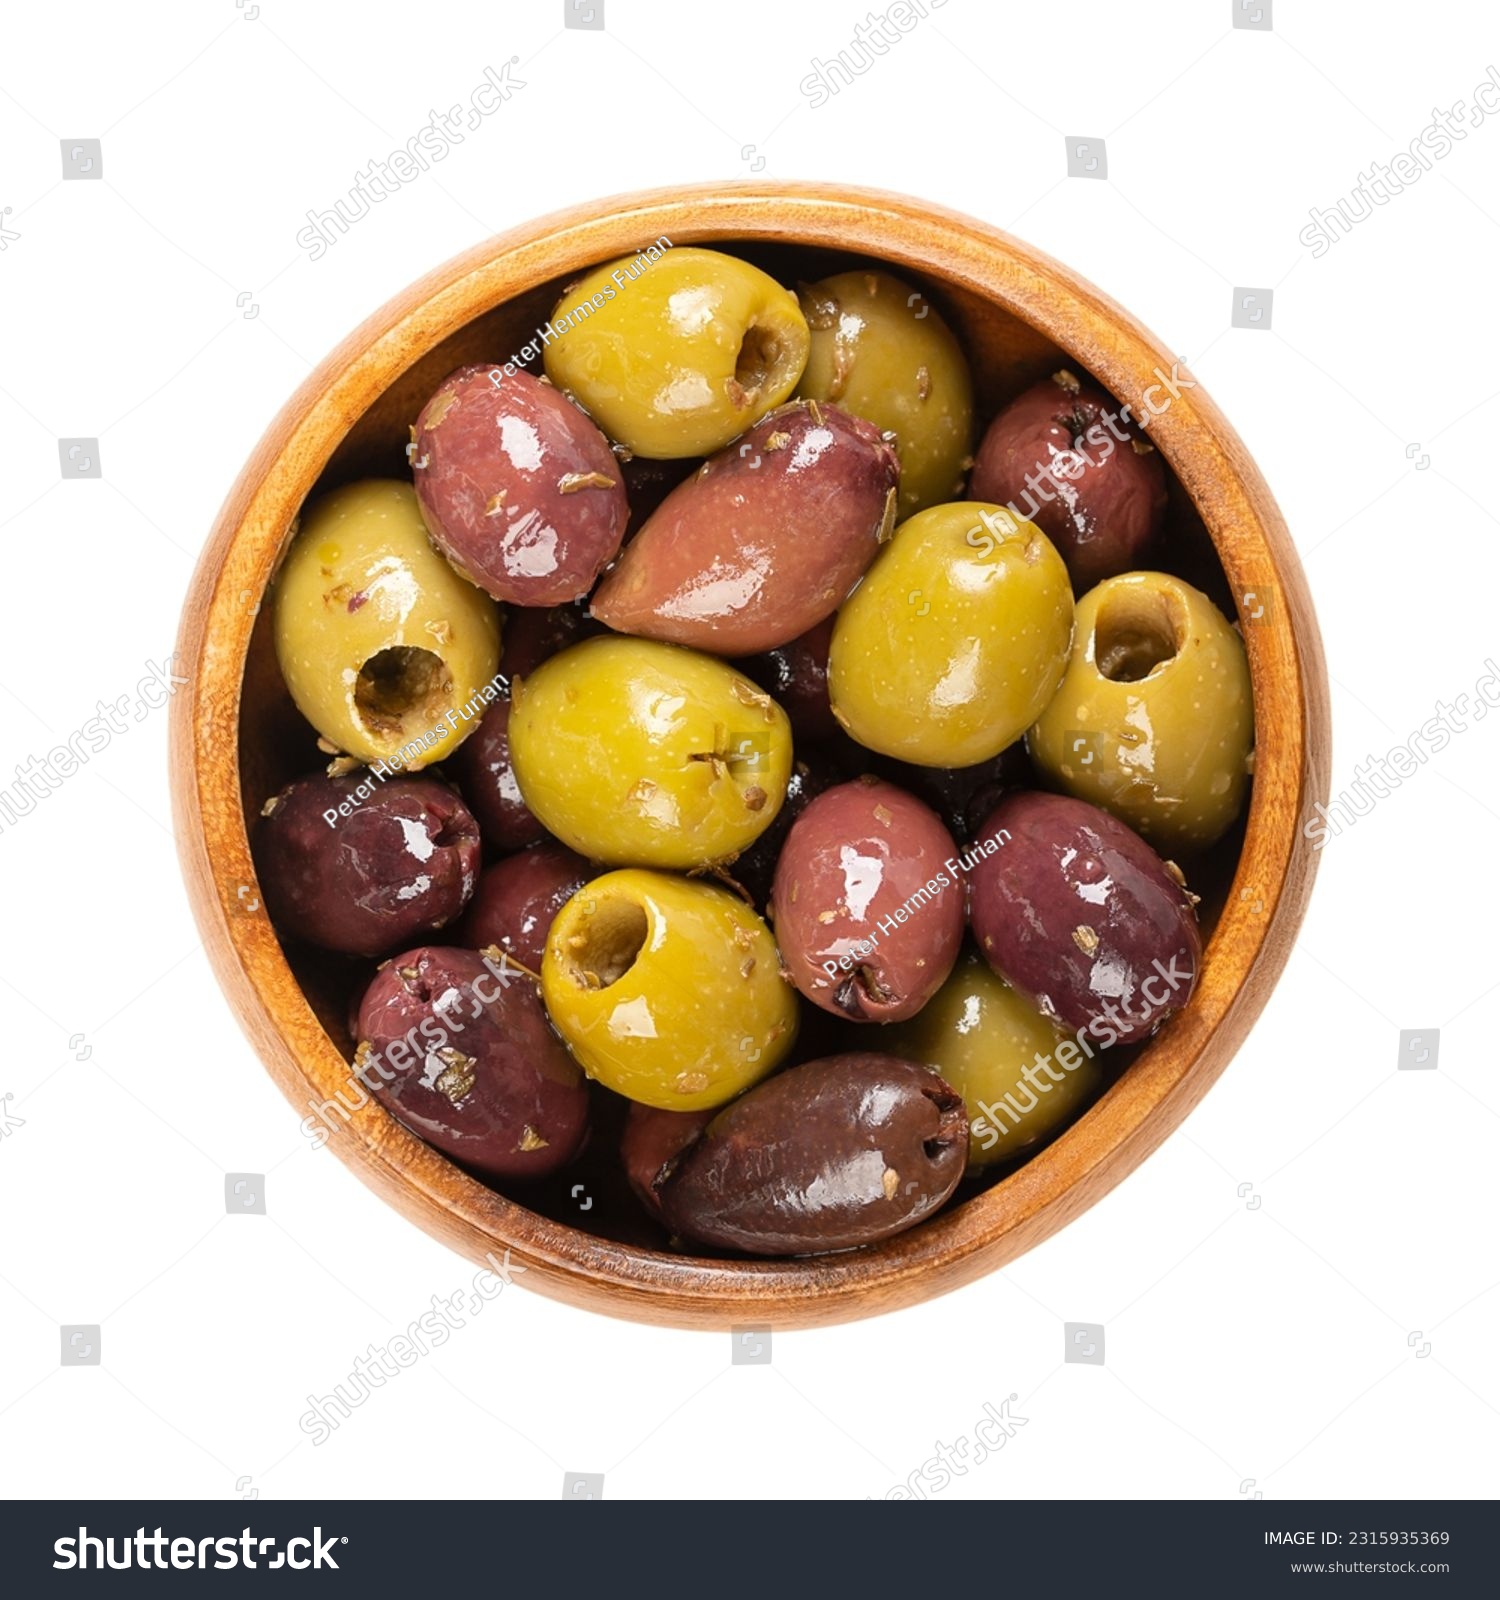 Pitted Kalamata and green olives, in a wooden bowl. Mix of organic Greek olives, green and black, with herbs, preserved in native olive oil. Popular table olives, used as snack, appetizer or garnish. #2315935369